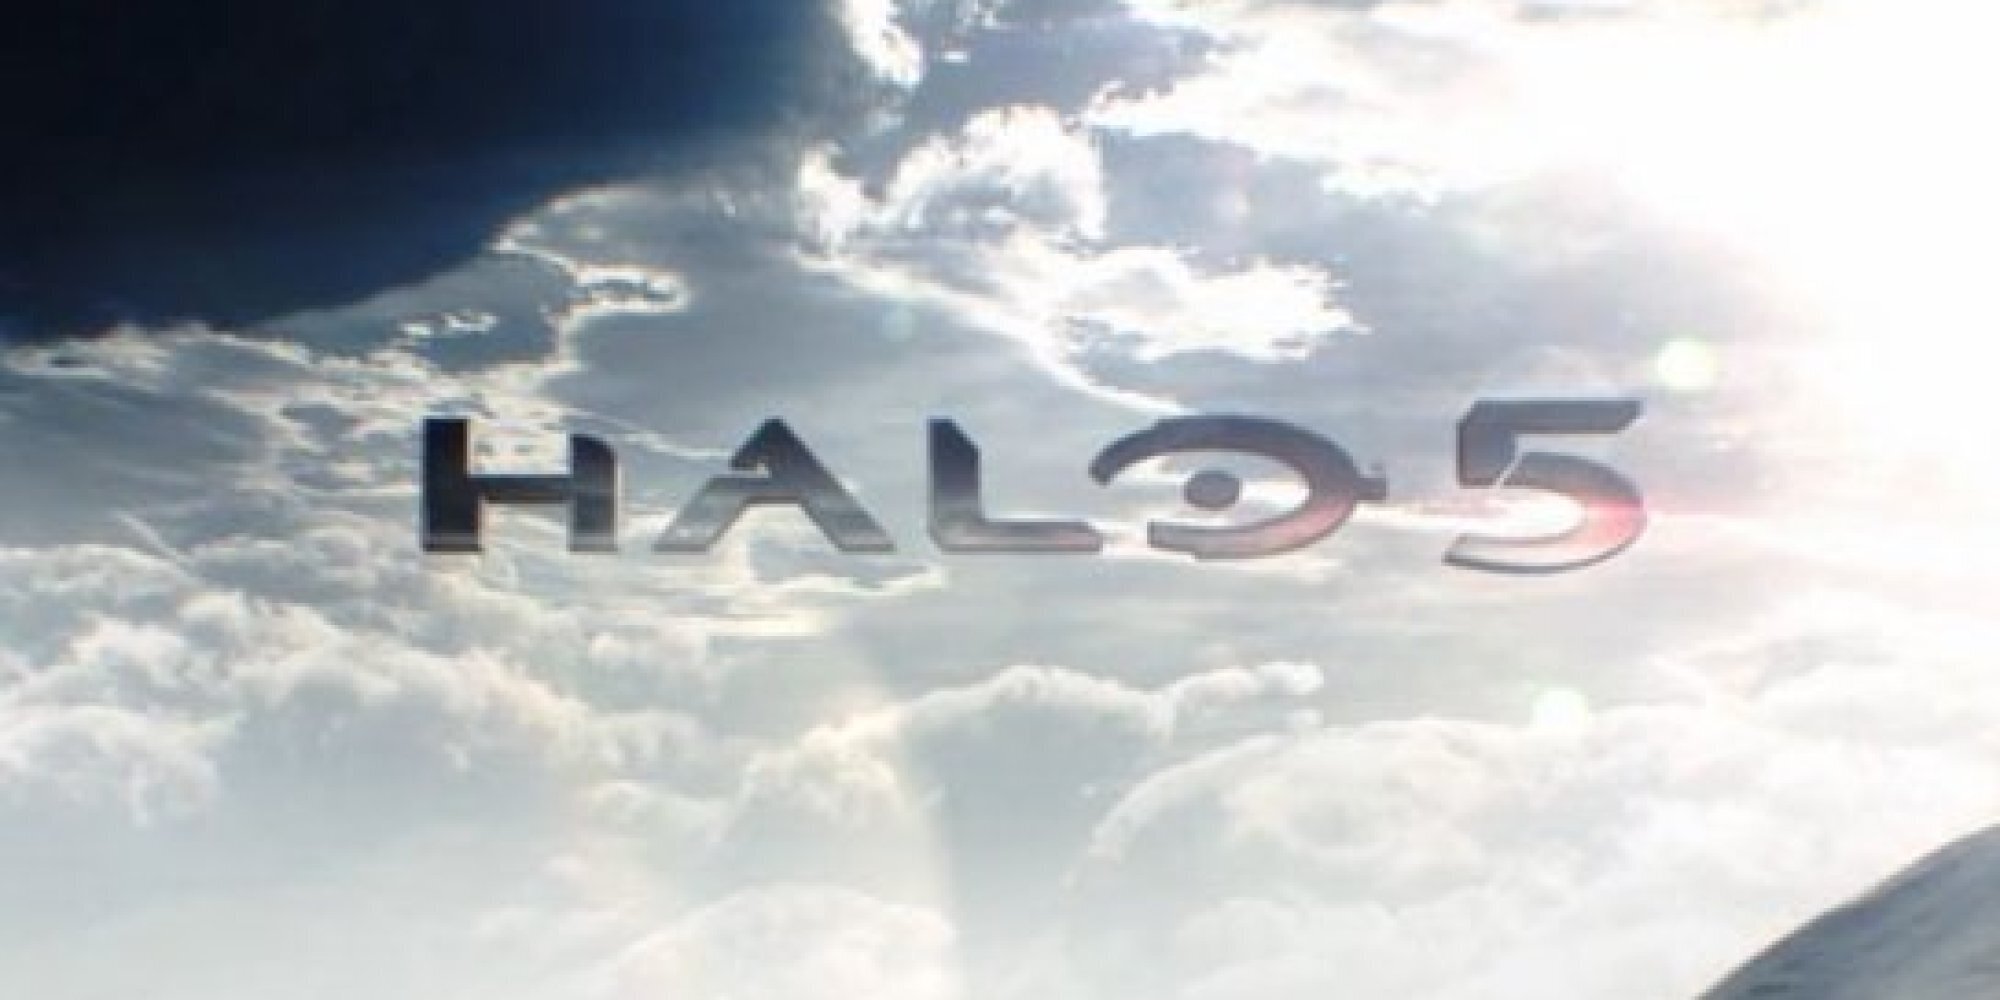 halo 5 release date